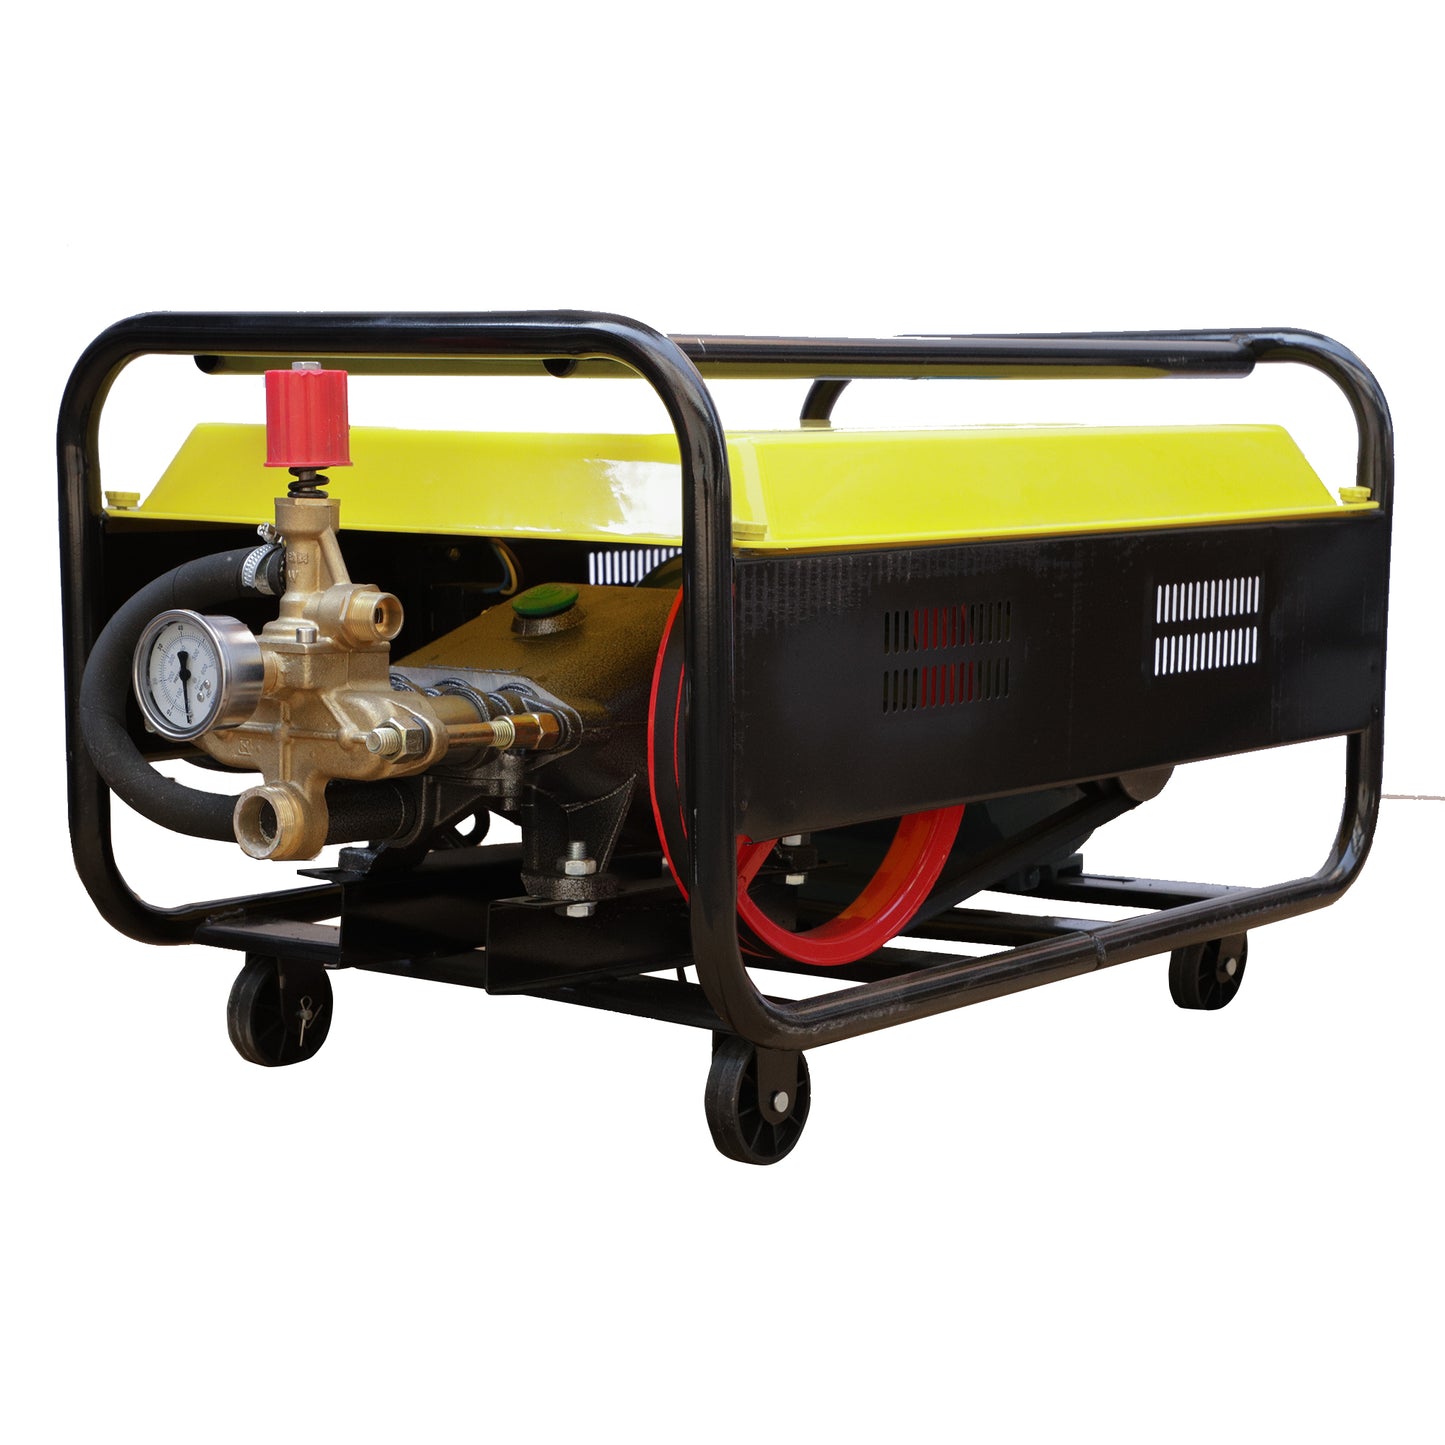 STARQ HPT TYPE HIGH PRESSURE WASHER WITH 3 HP COPPER WINDING MOTOR, BELT & ALL ACCESSORIES